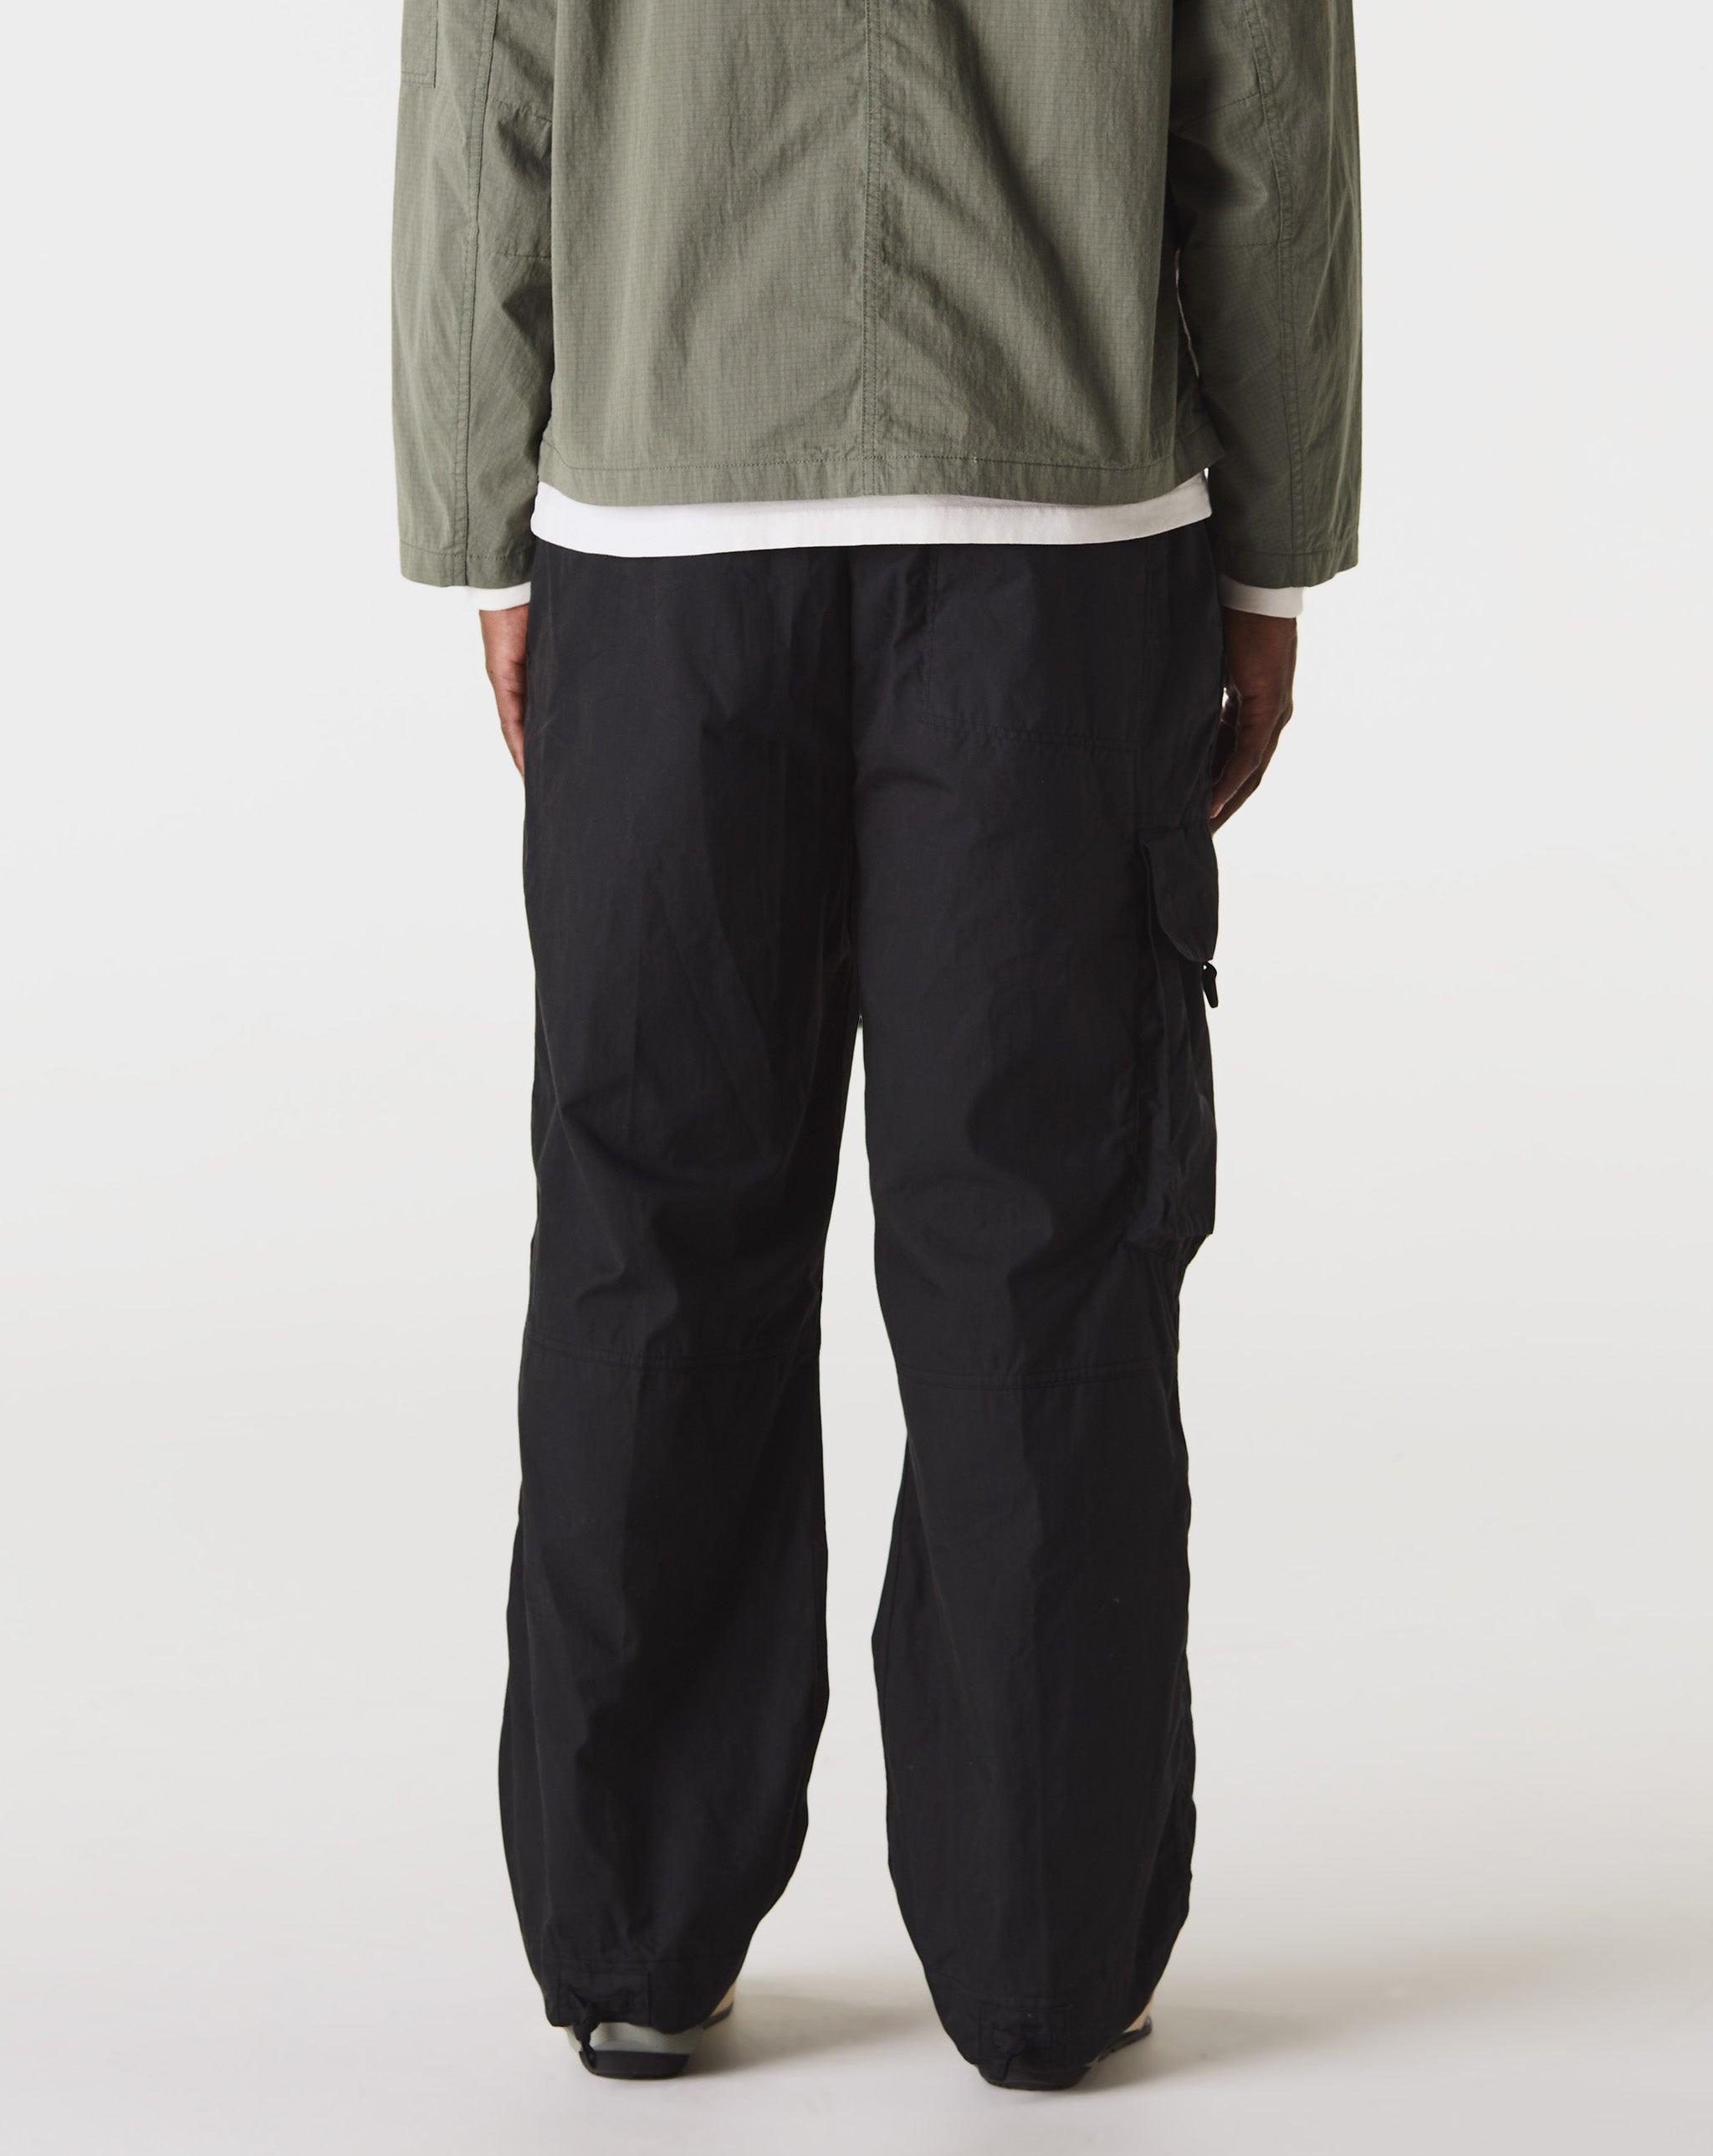 Nike trousers with logo acne studios trousers indigo blue  - Cheap Cerbe Jordan outlet